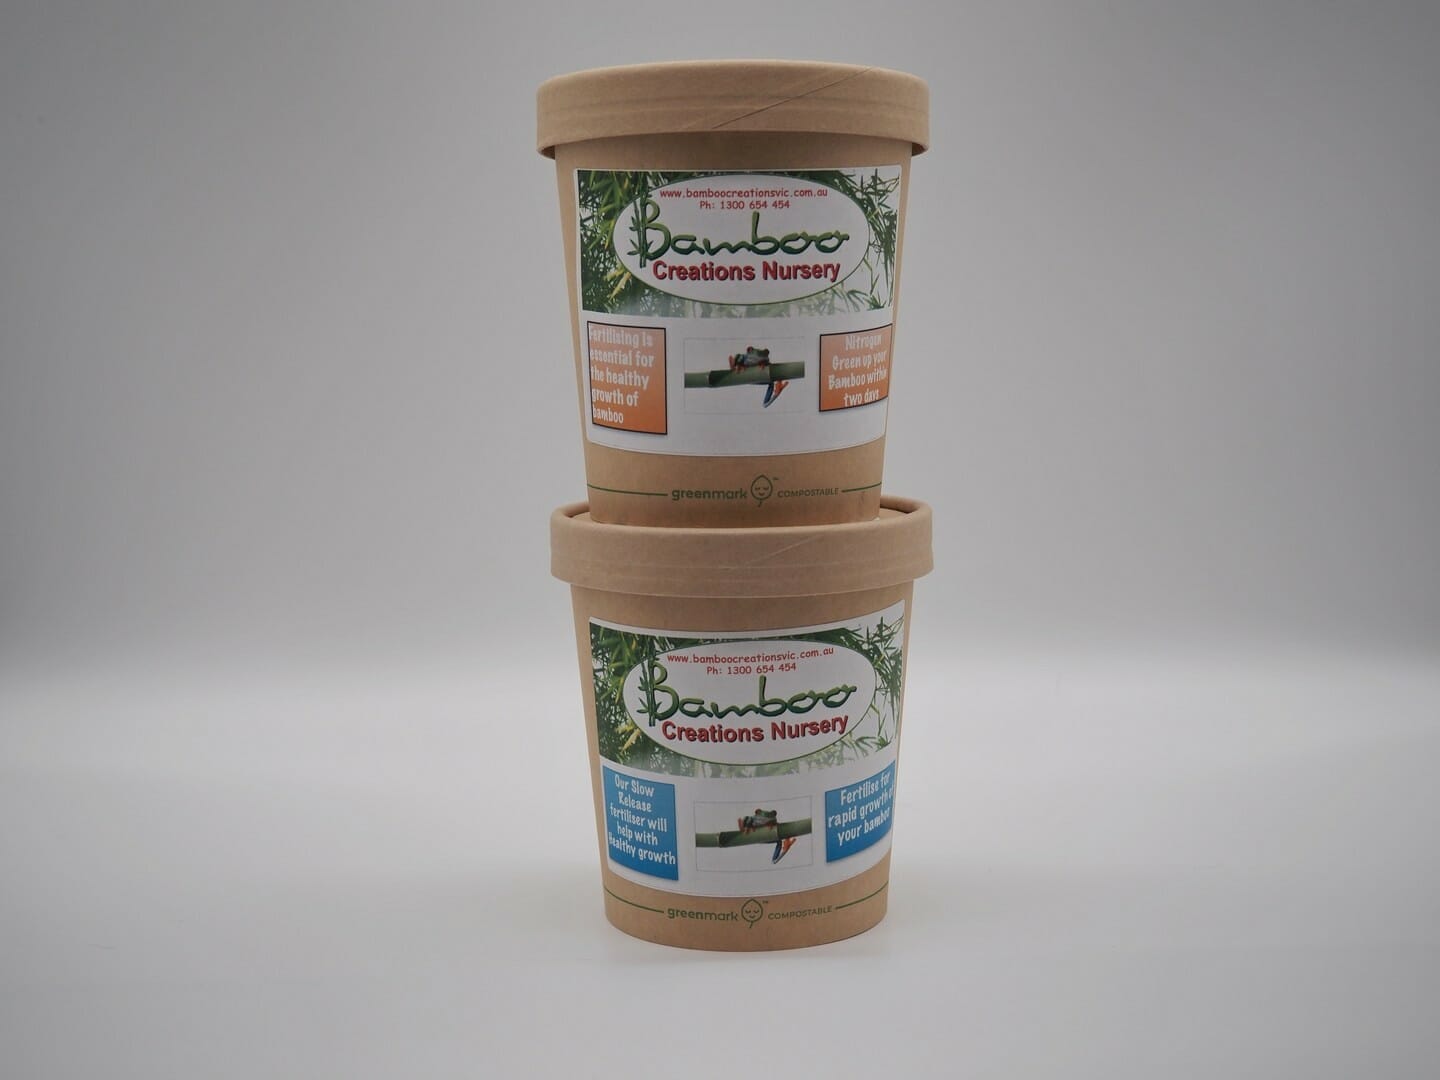 Specialist bamboo fertilisers - large 737g bundle, in an eco-friendly, compostable container, with lid.